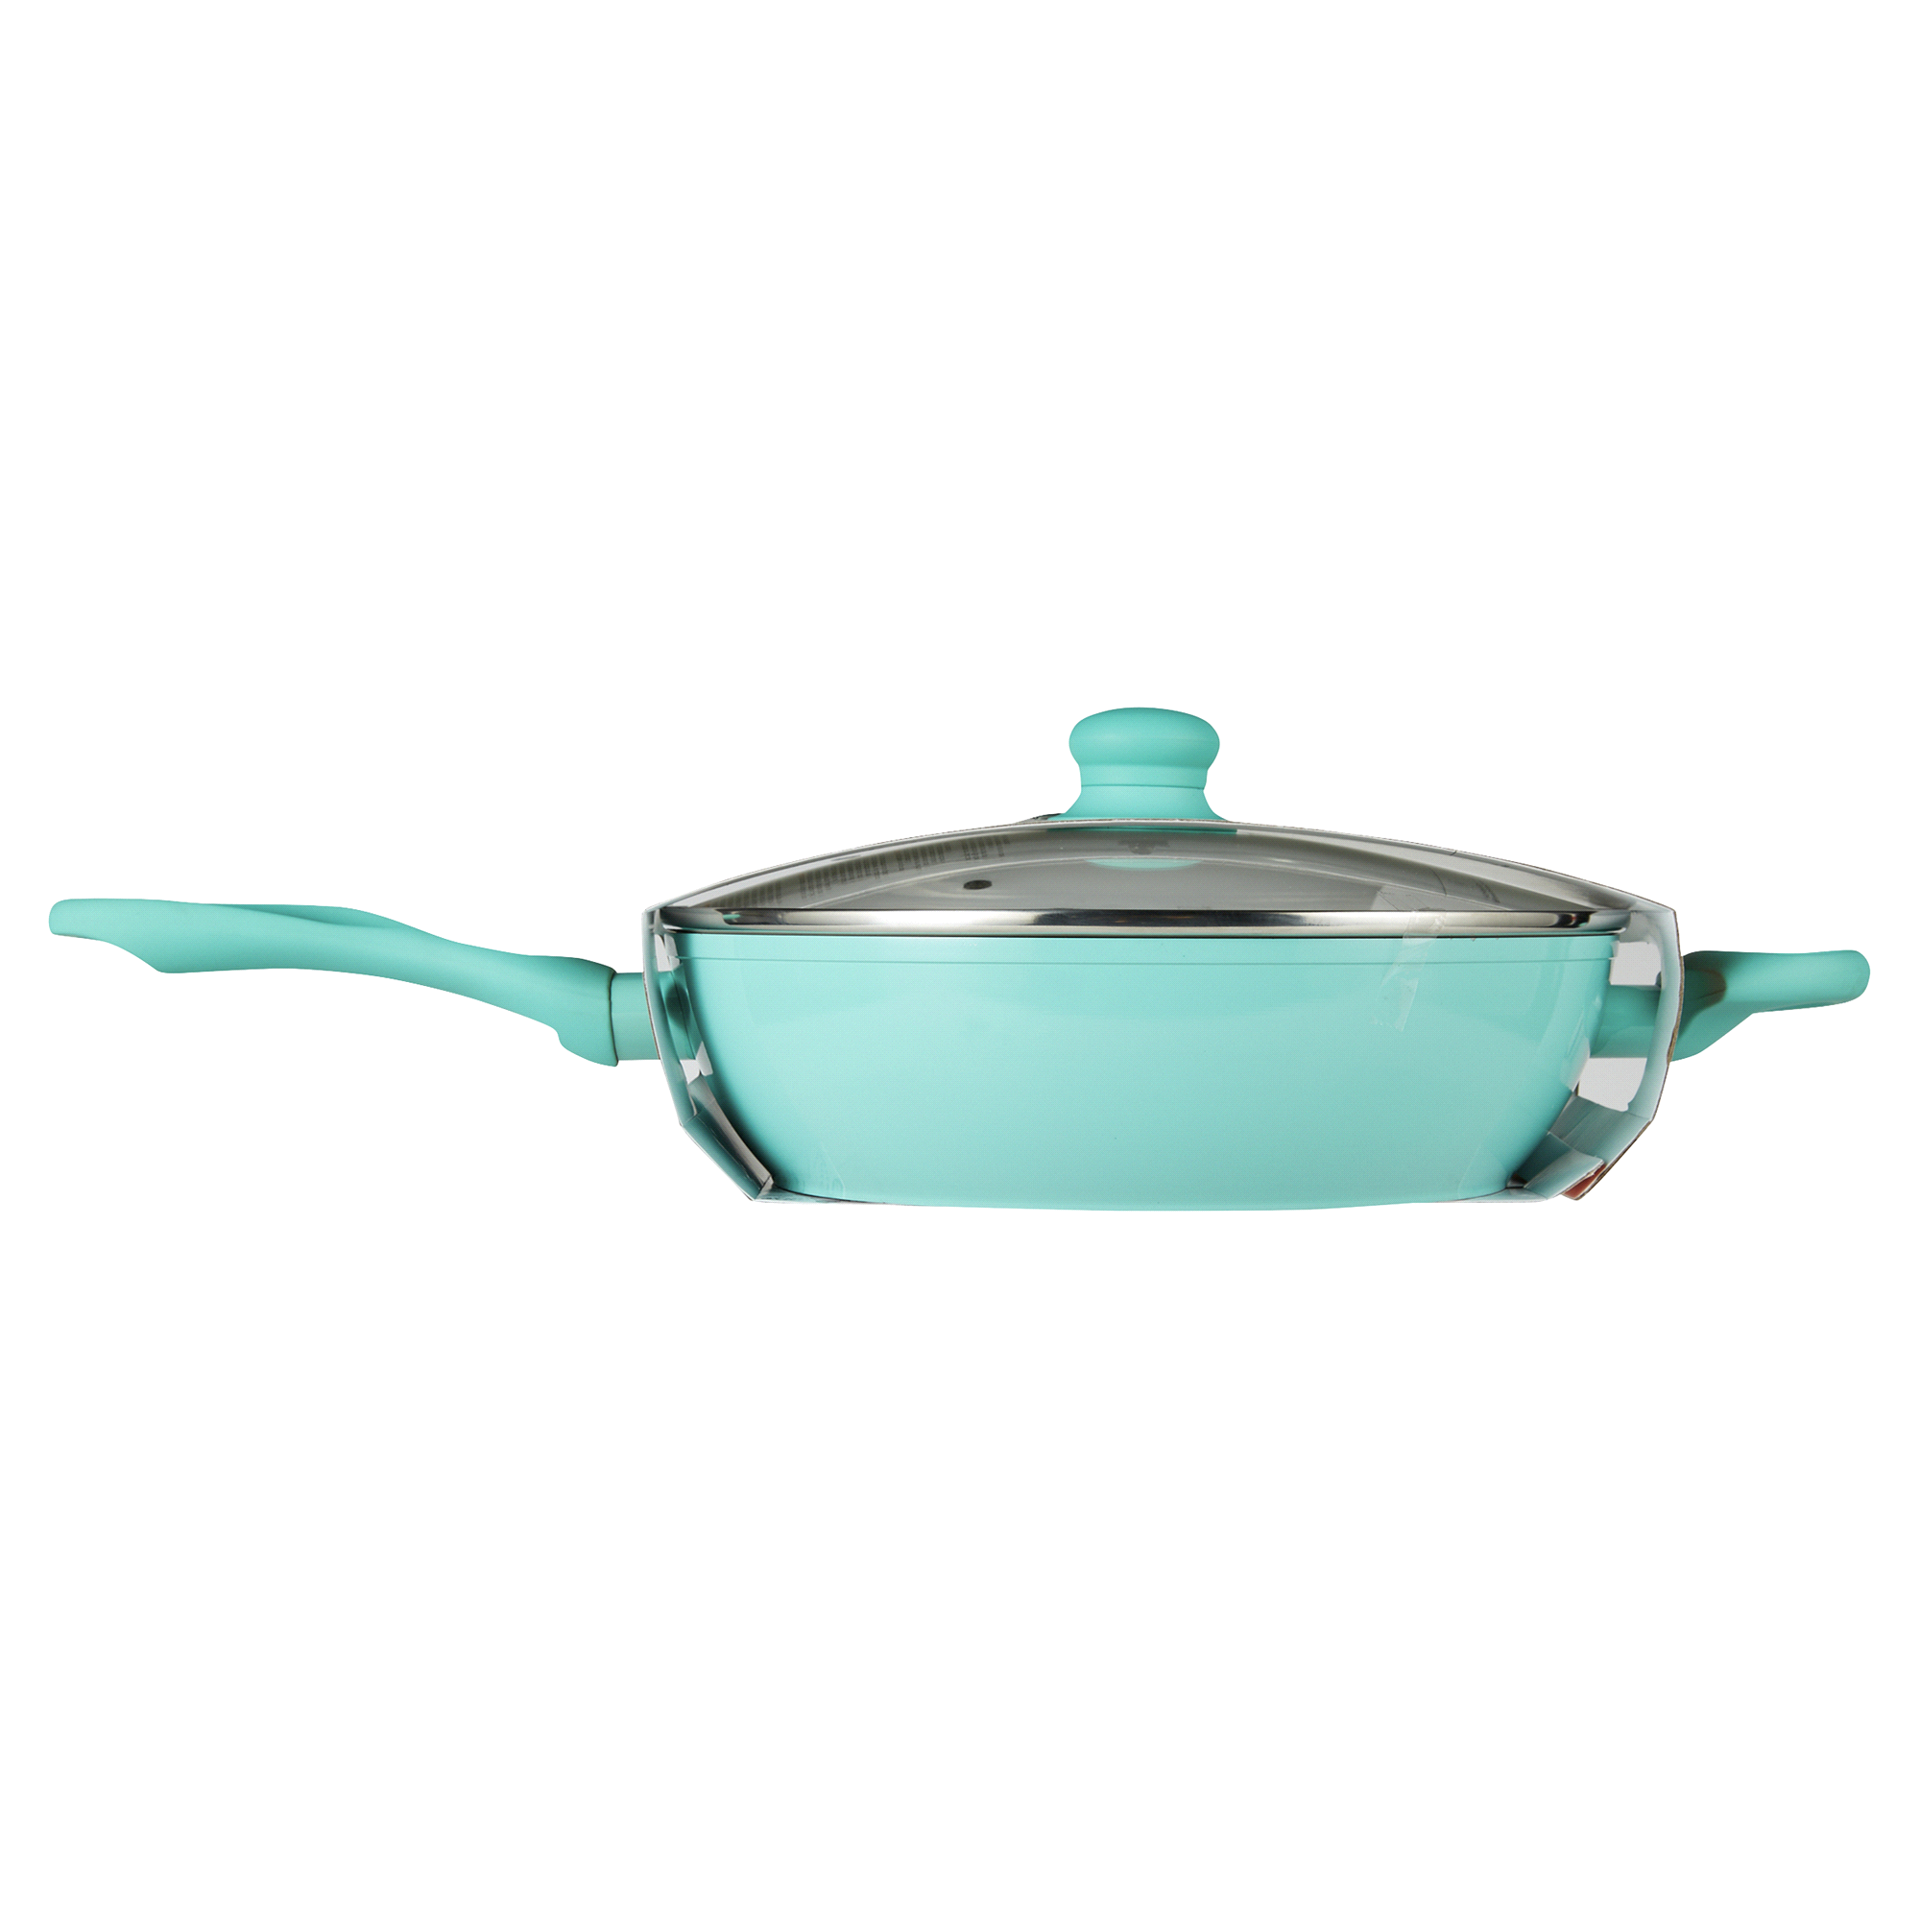 slide 10 of 29, IMUSA USA IMU-30053 Forged Teal Jumbo Cooker with Ceramic Nonstick, 4 qt